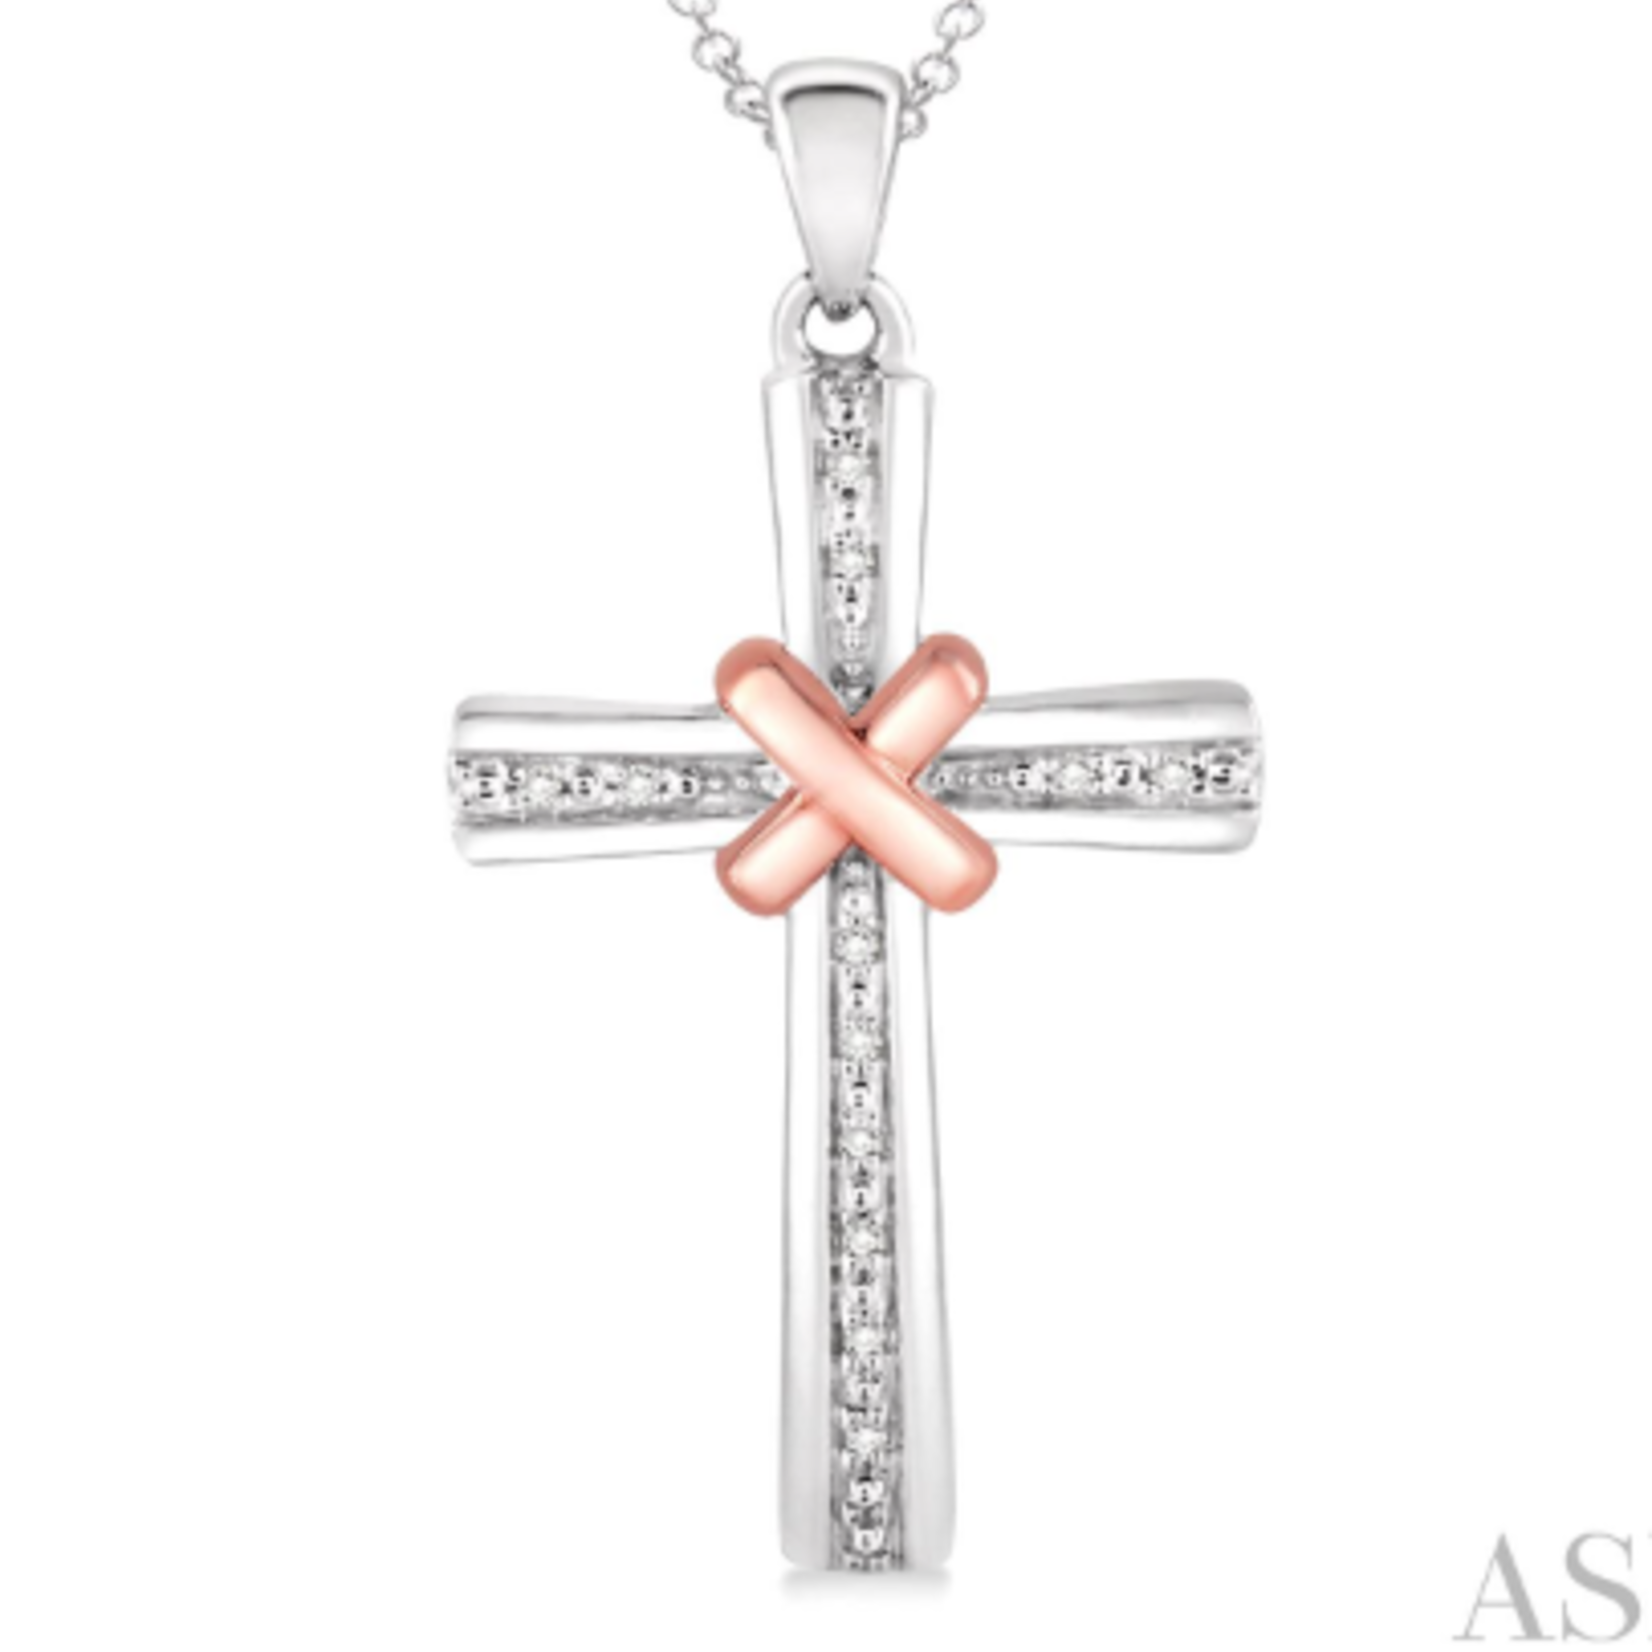 Sterling Silver Diamond Cross with Chain